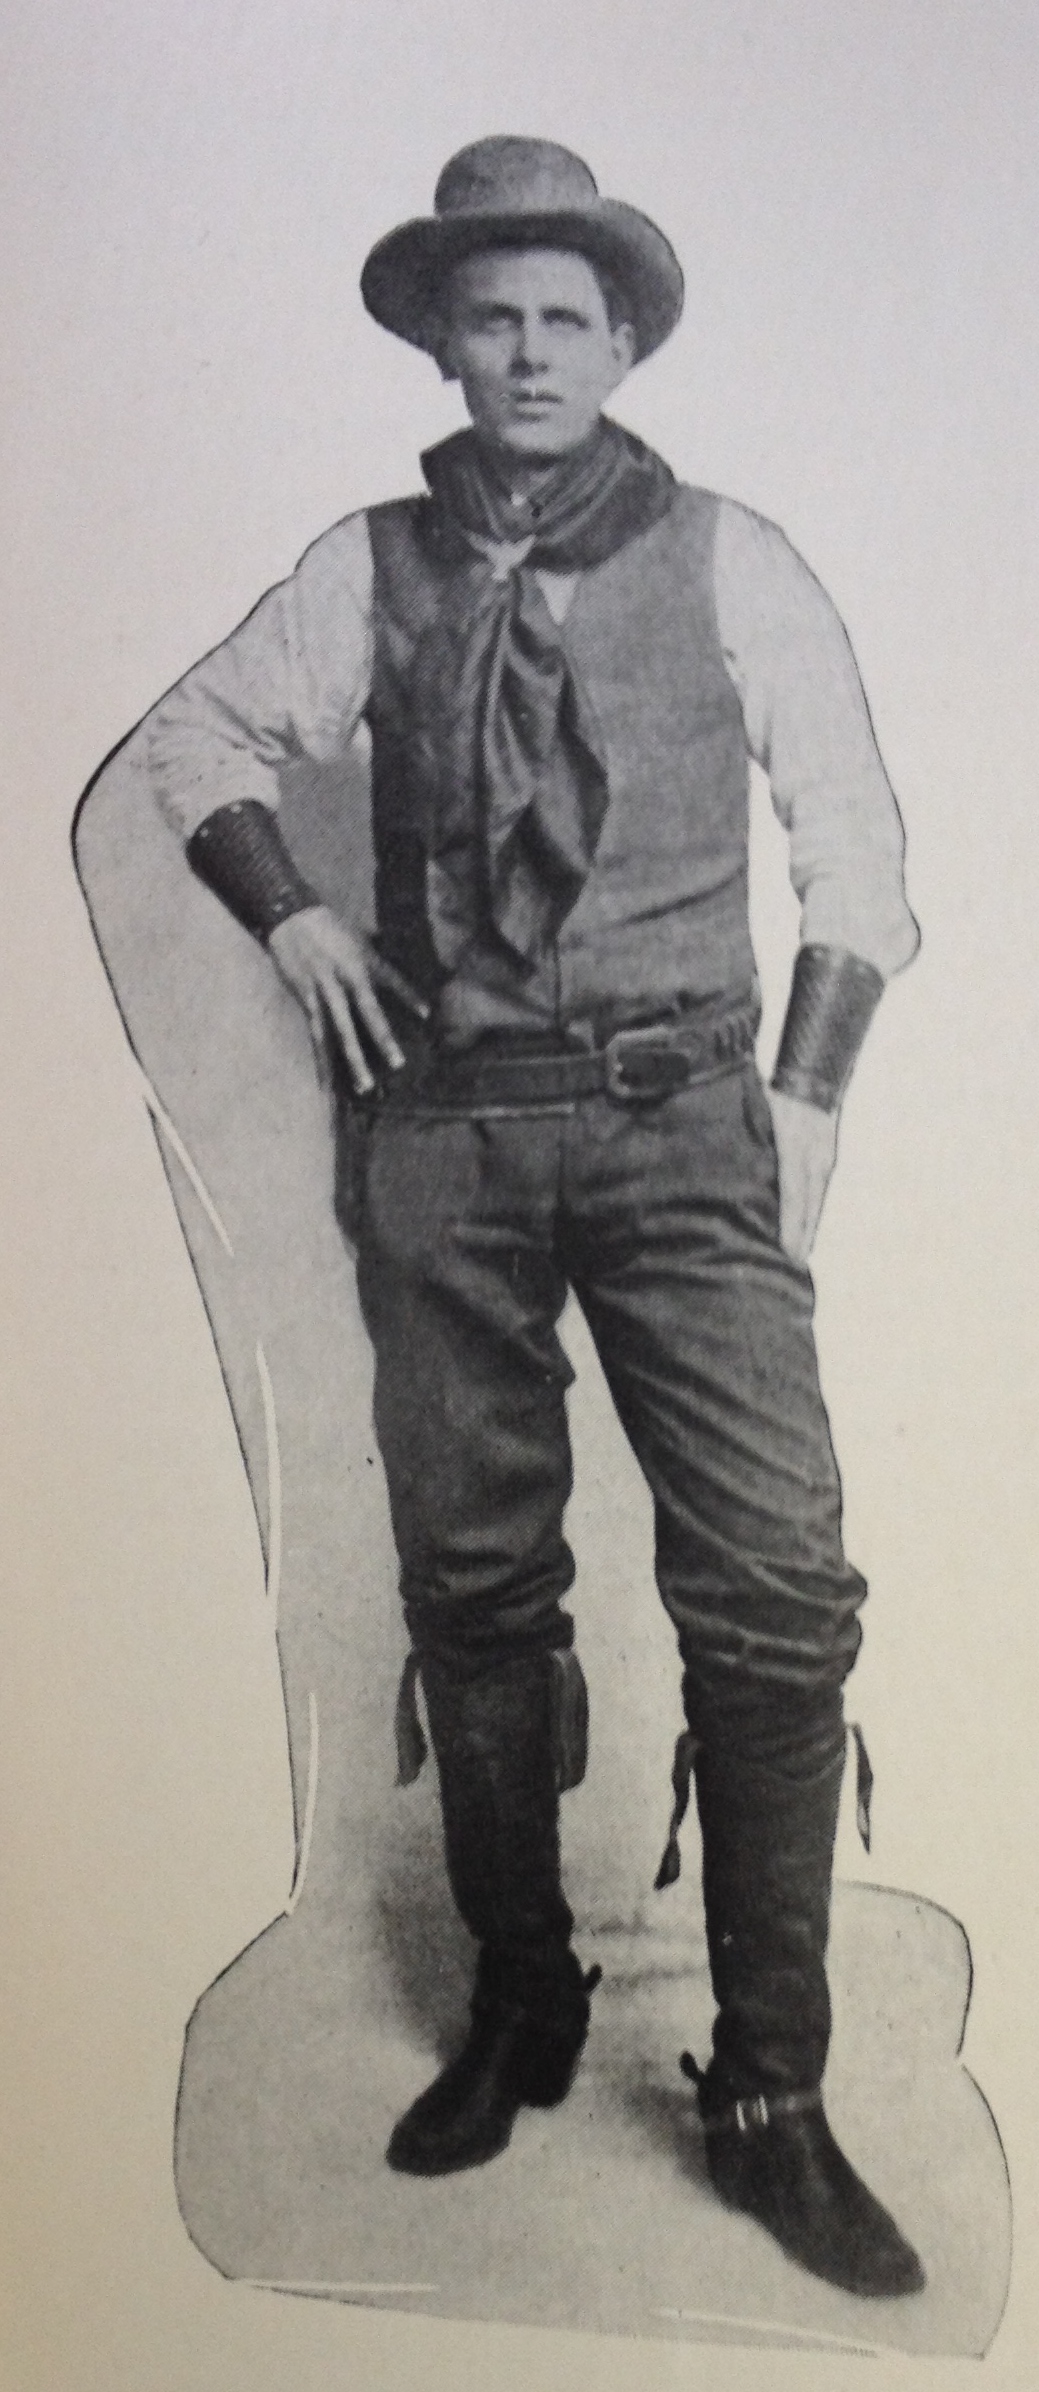 M. Raymond Harrington in his exploring outfit